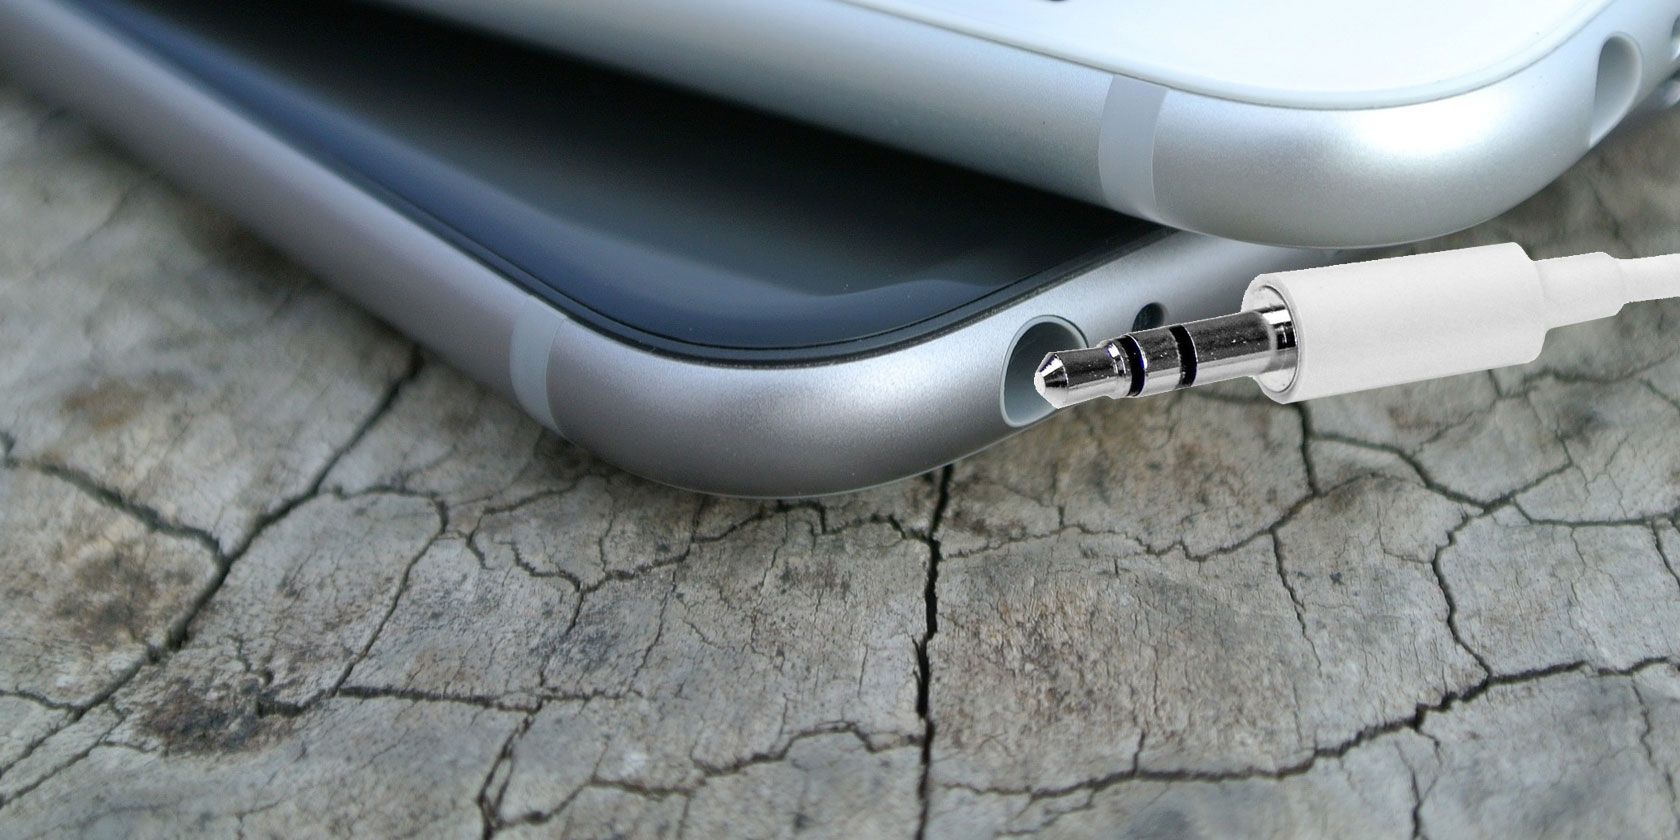 How to Remove a Broken Headphone Plug From a Phone or Tablet